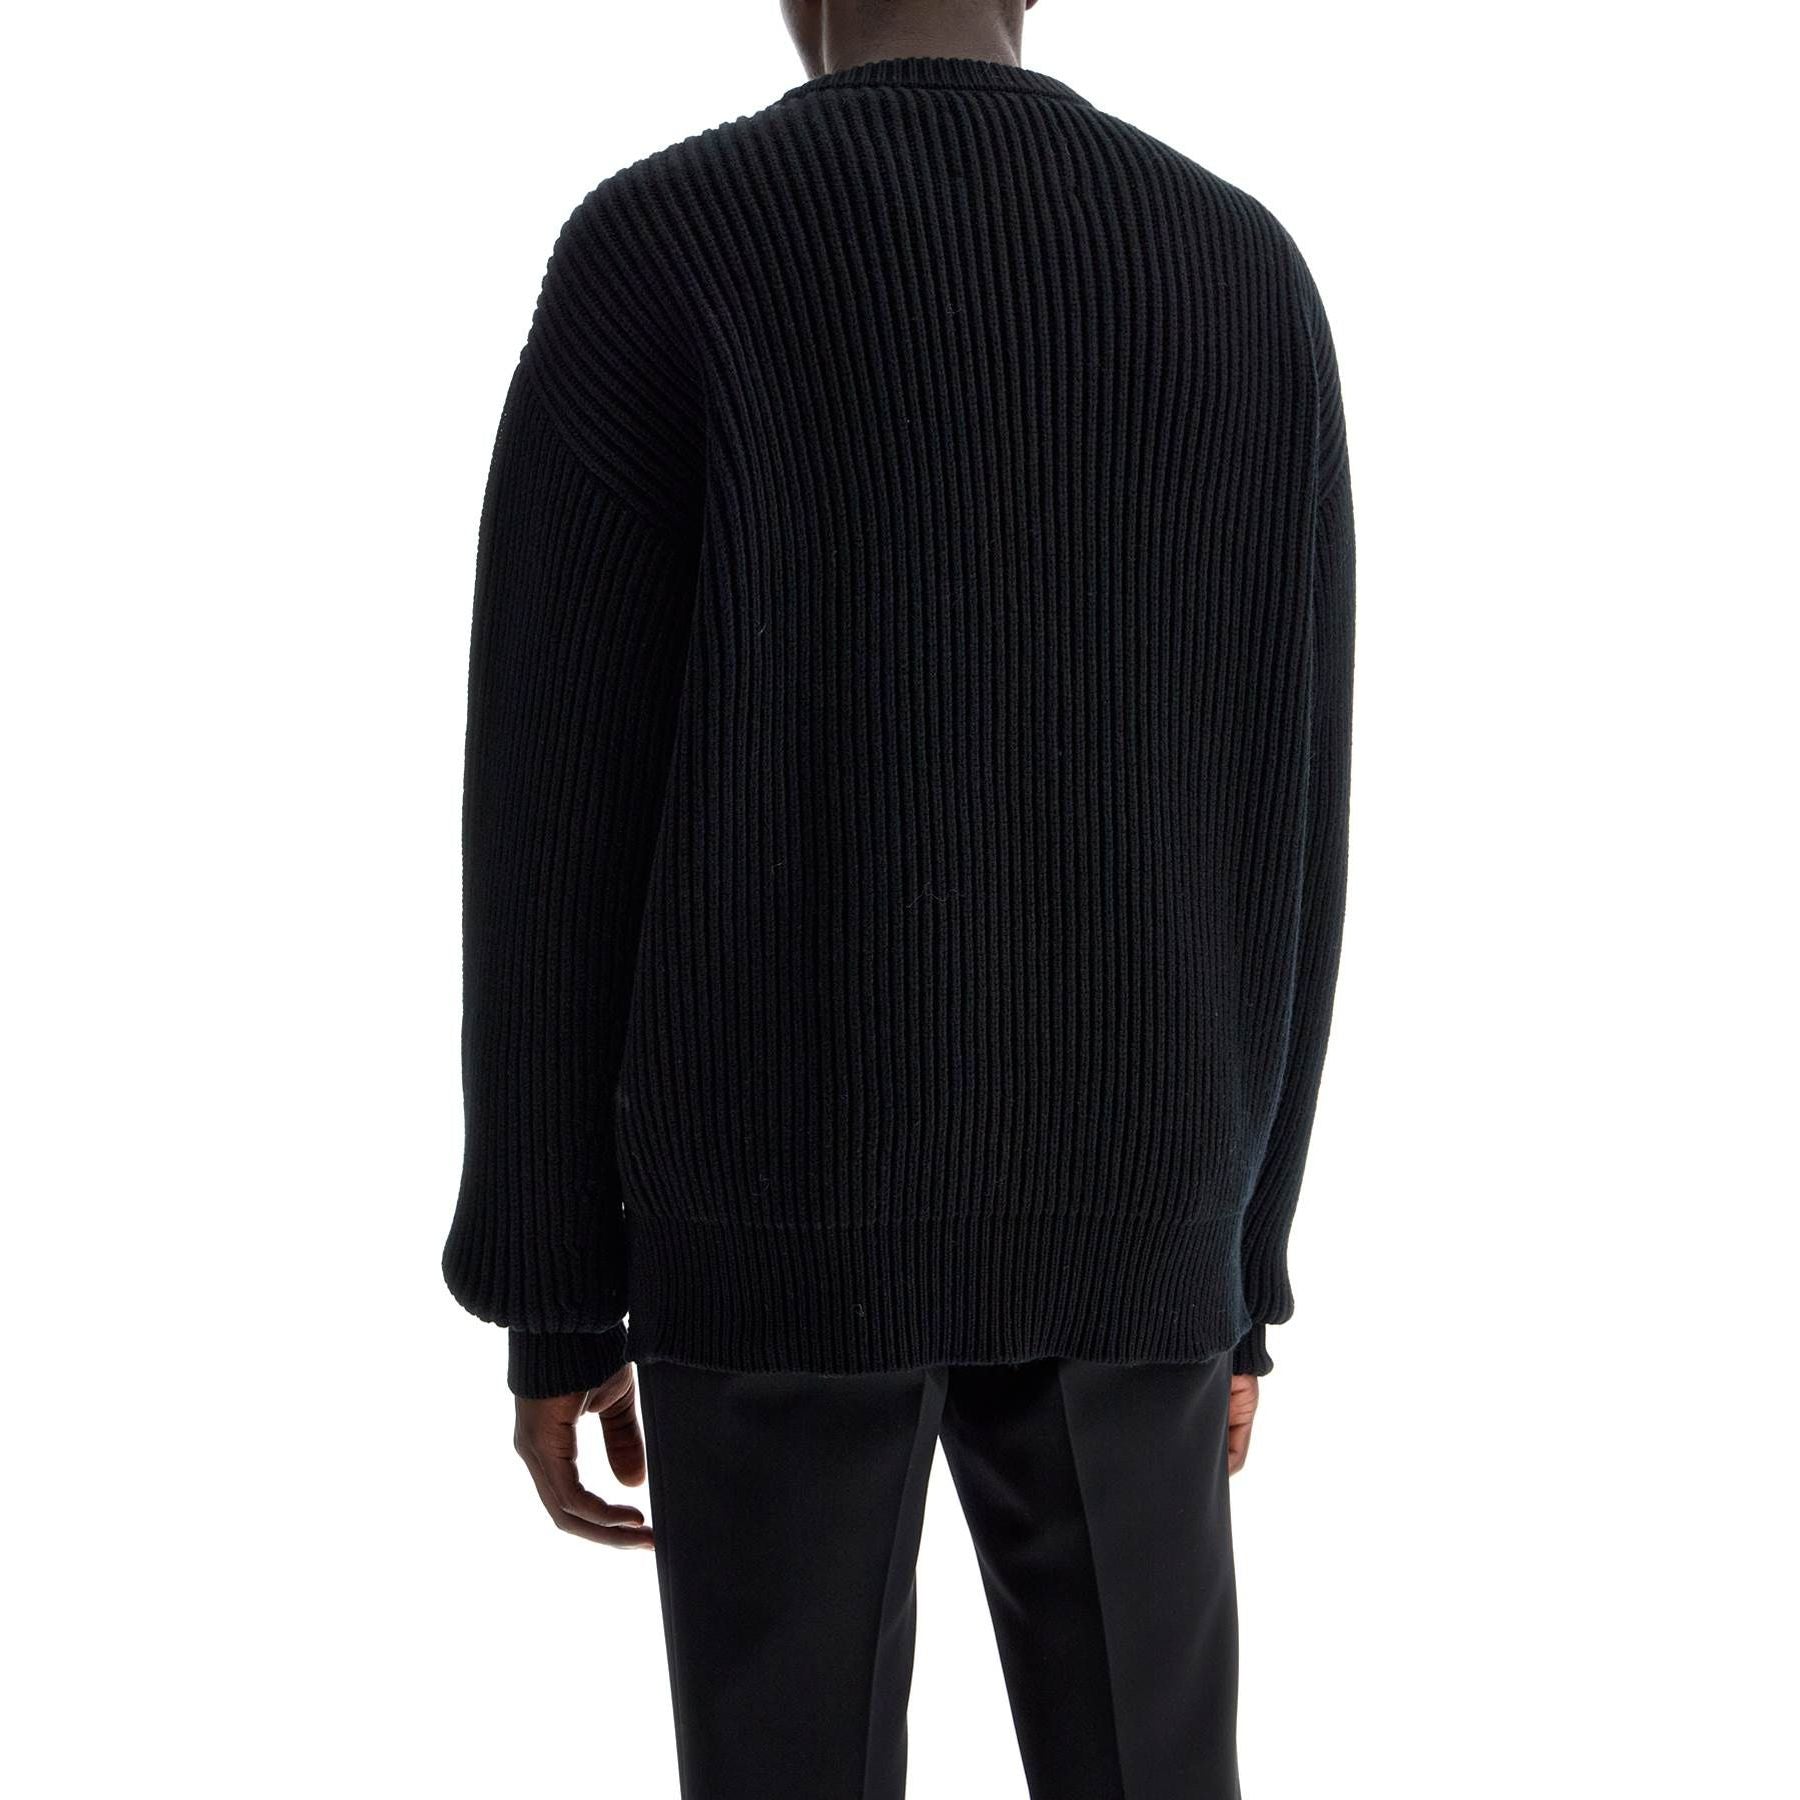 Ribbed Wool Knit Sweater